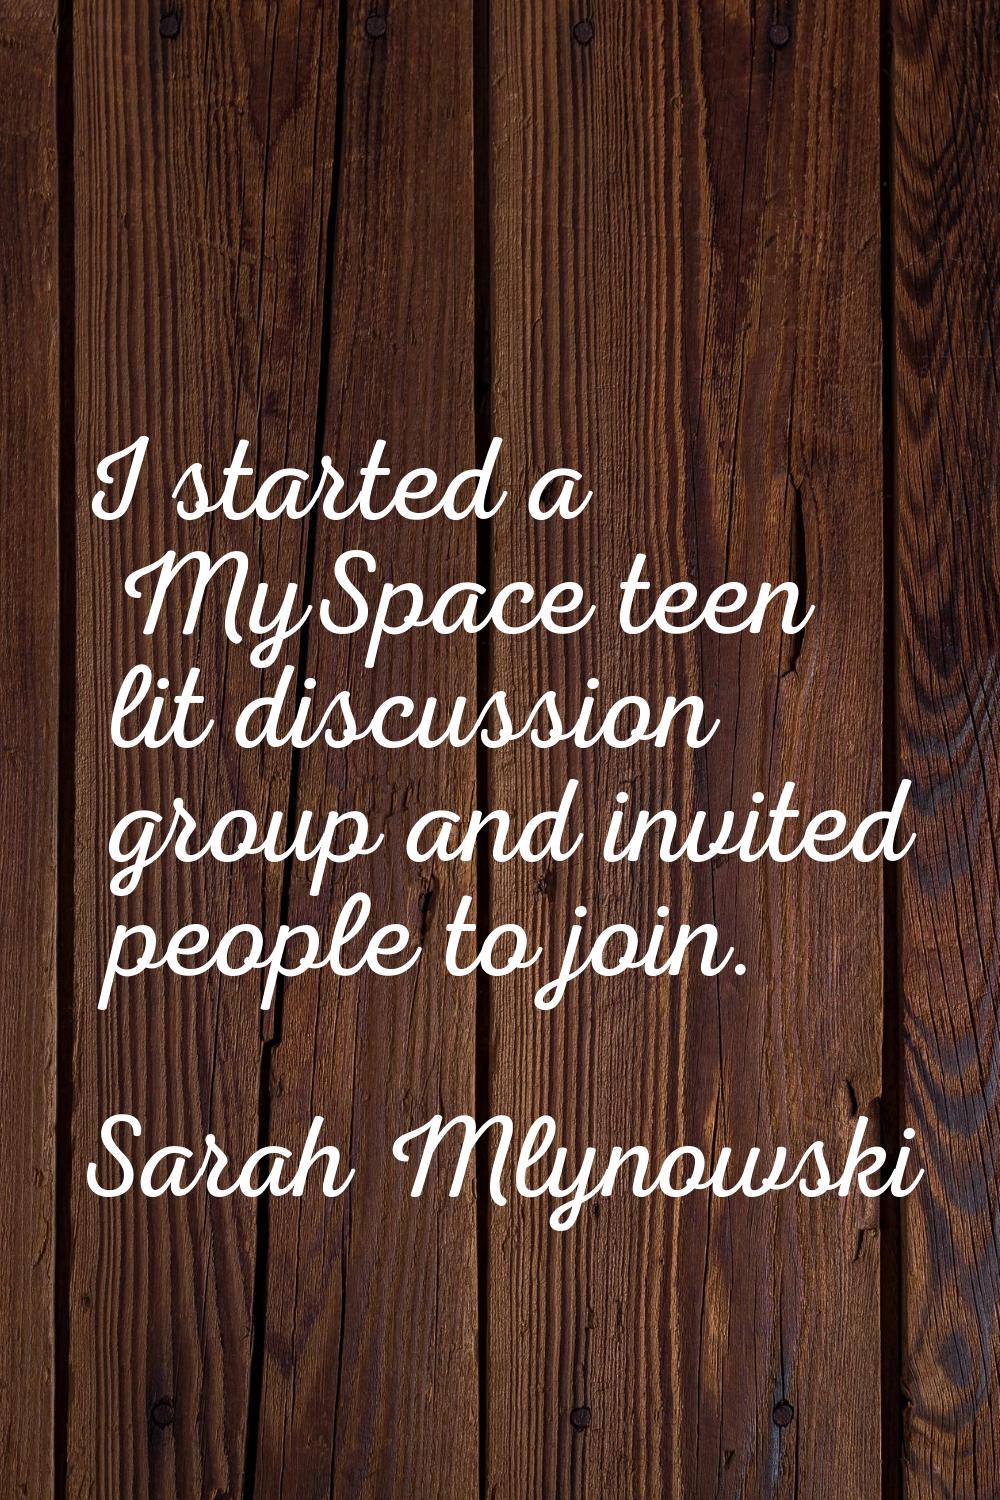 I started a MySpace teen lit discussion group and invited people to join.